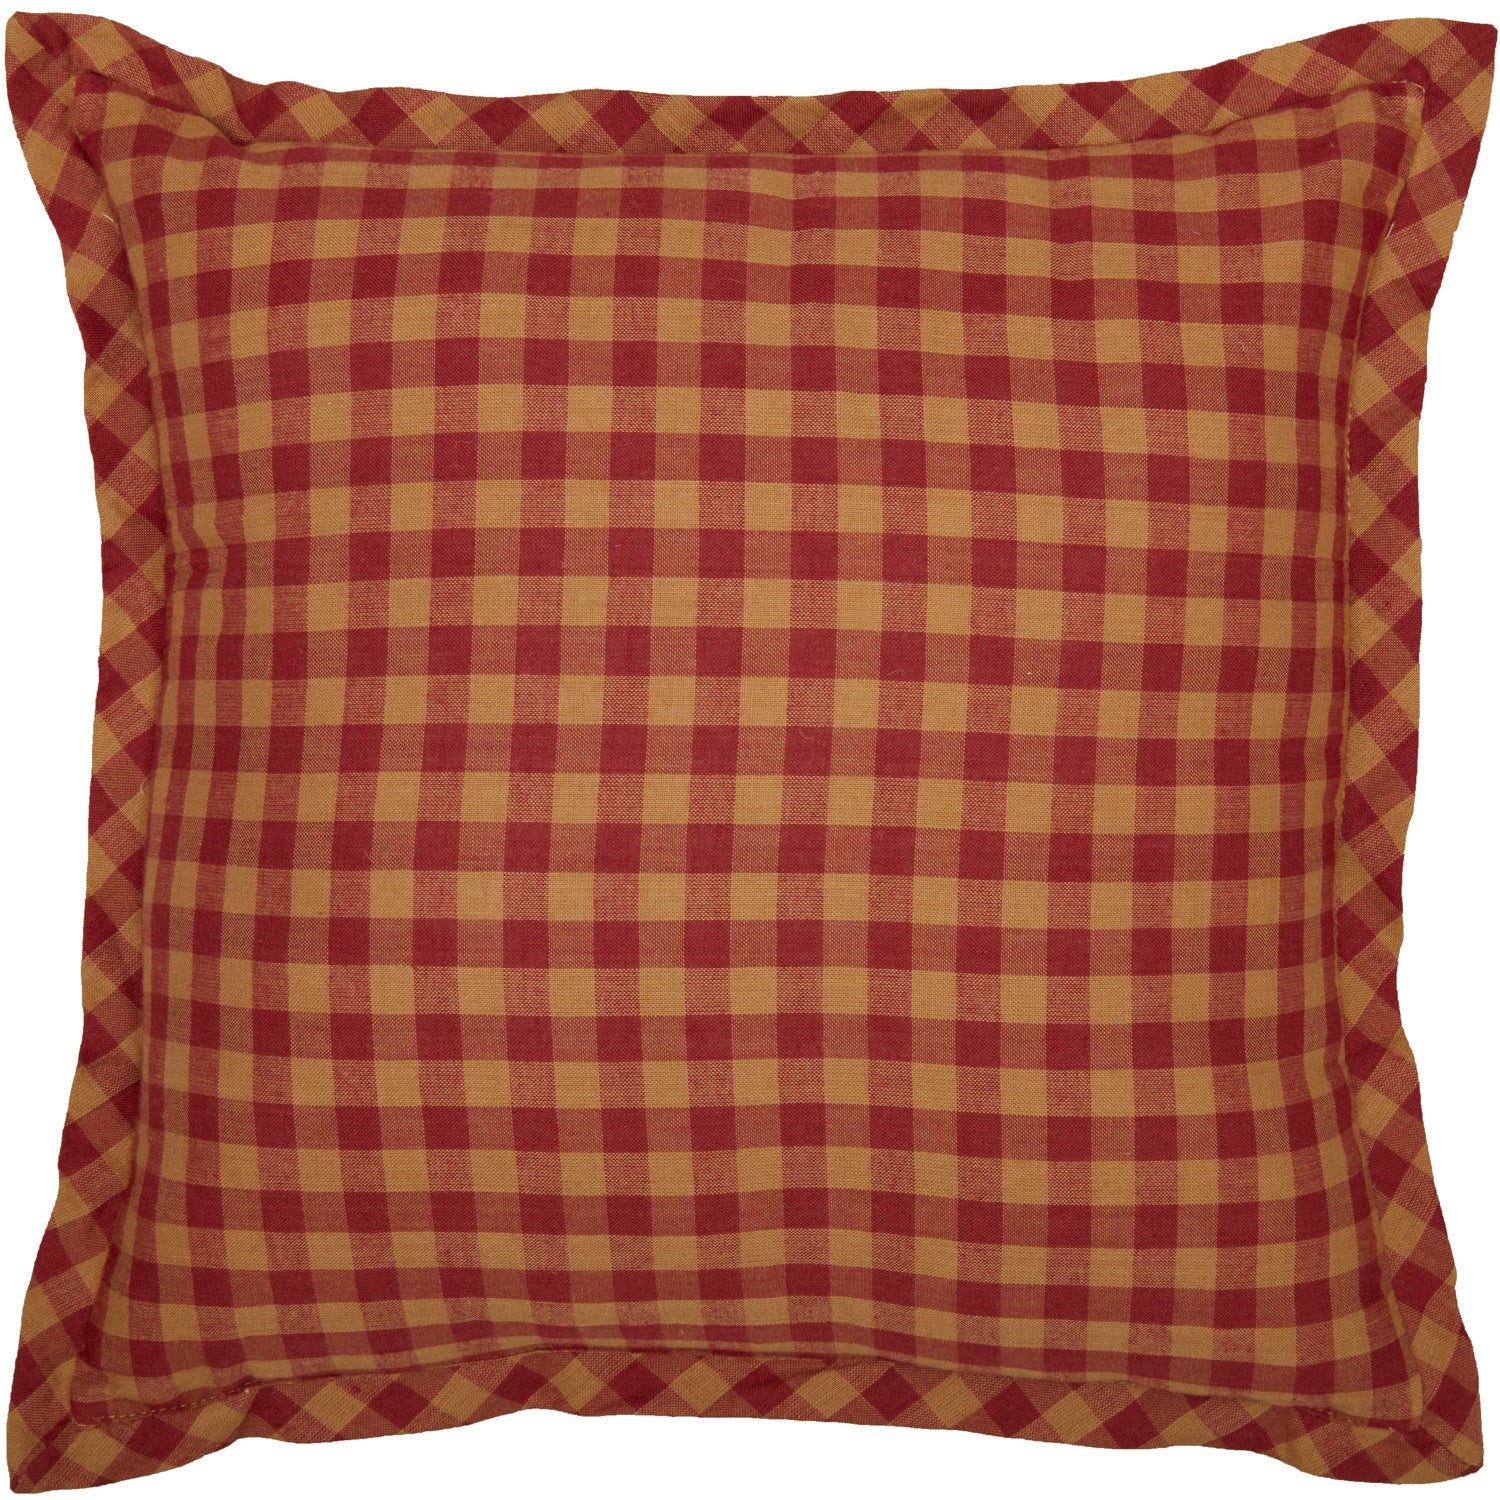 56743-Ninepatch-Star-Prim-Blessings-Pillow-12x12-image-5